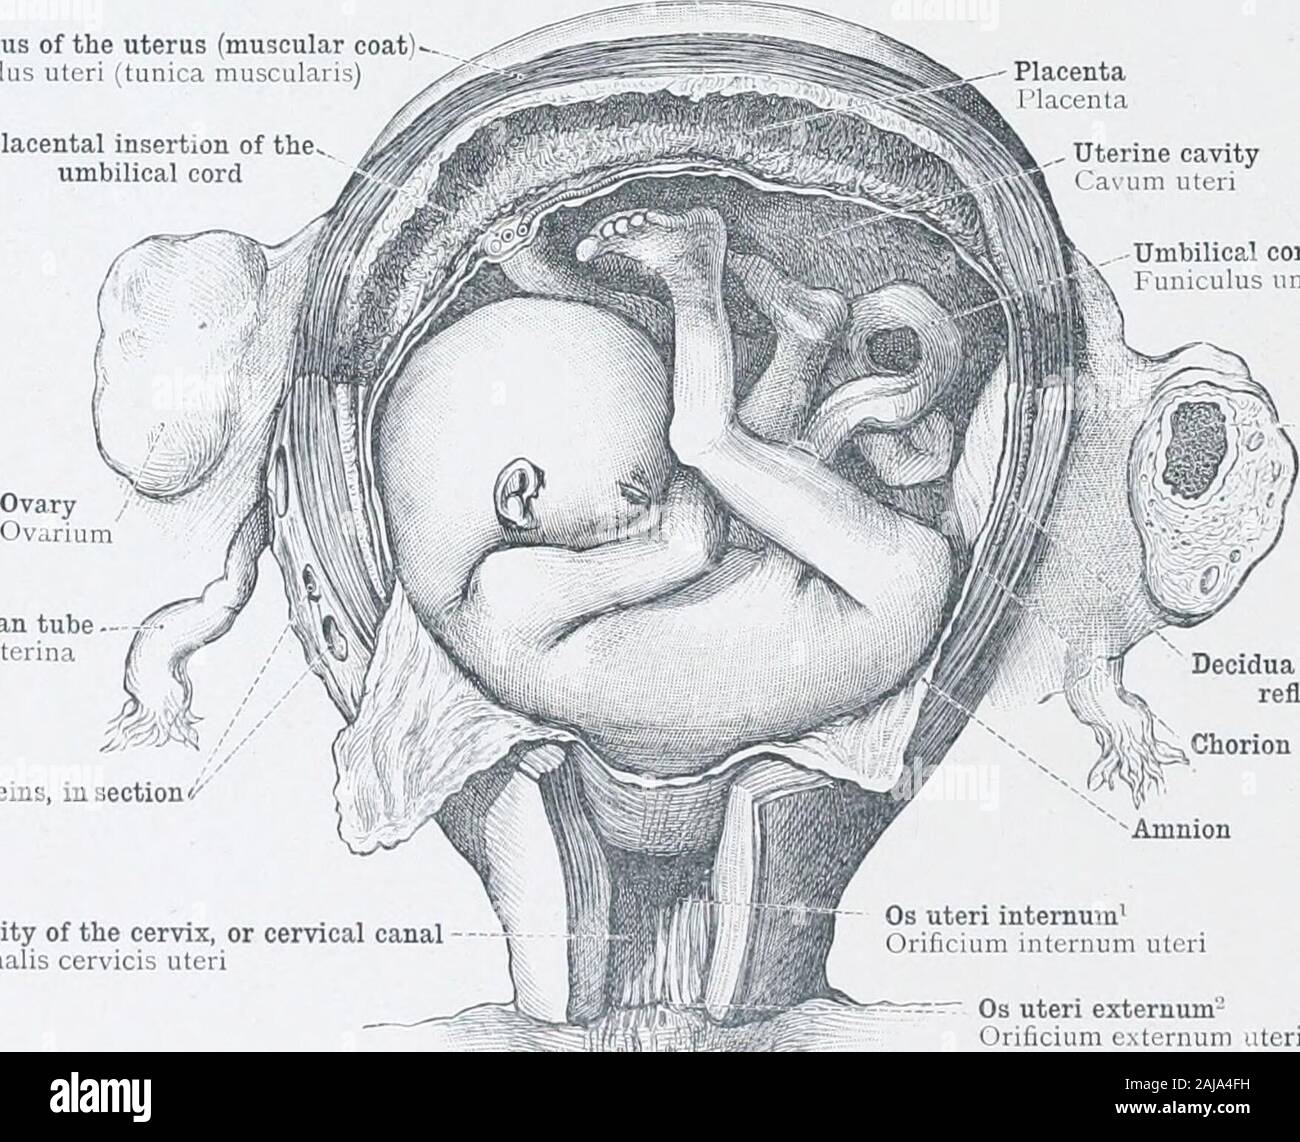 An atlas of human anatomy for students and physicians . Yolk sac (umbilical vesicle)Amnion Fallopian tube Tuba uterina (Falloppii) Neck of the uterus or cervix uteri Uterine cavityCa um uteri Embryo Os uteri internumOrificuim internum uteri Cavity of the cervix, or cervical canal ( analis cerMcis uteri Os uteri extemum- Orificium externum uteri Fig. 890.—Uterus in the Fifth Week of Pregnancy, opened from Behind. By the reniov.il of parts of the membranes the cavity of the amnion has been opened. Fundus of the uterus (muscular coat)Fundus uteri (tunica musculaiis) Placental insertion of the.,u Stock Photo